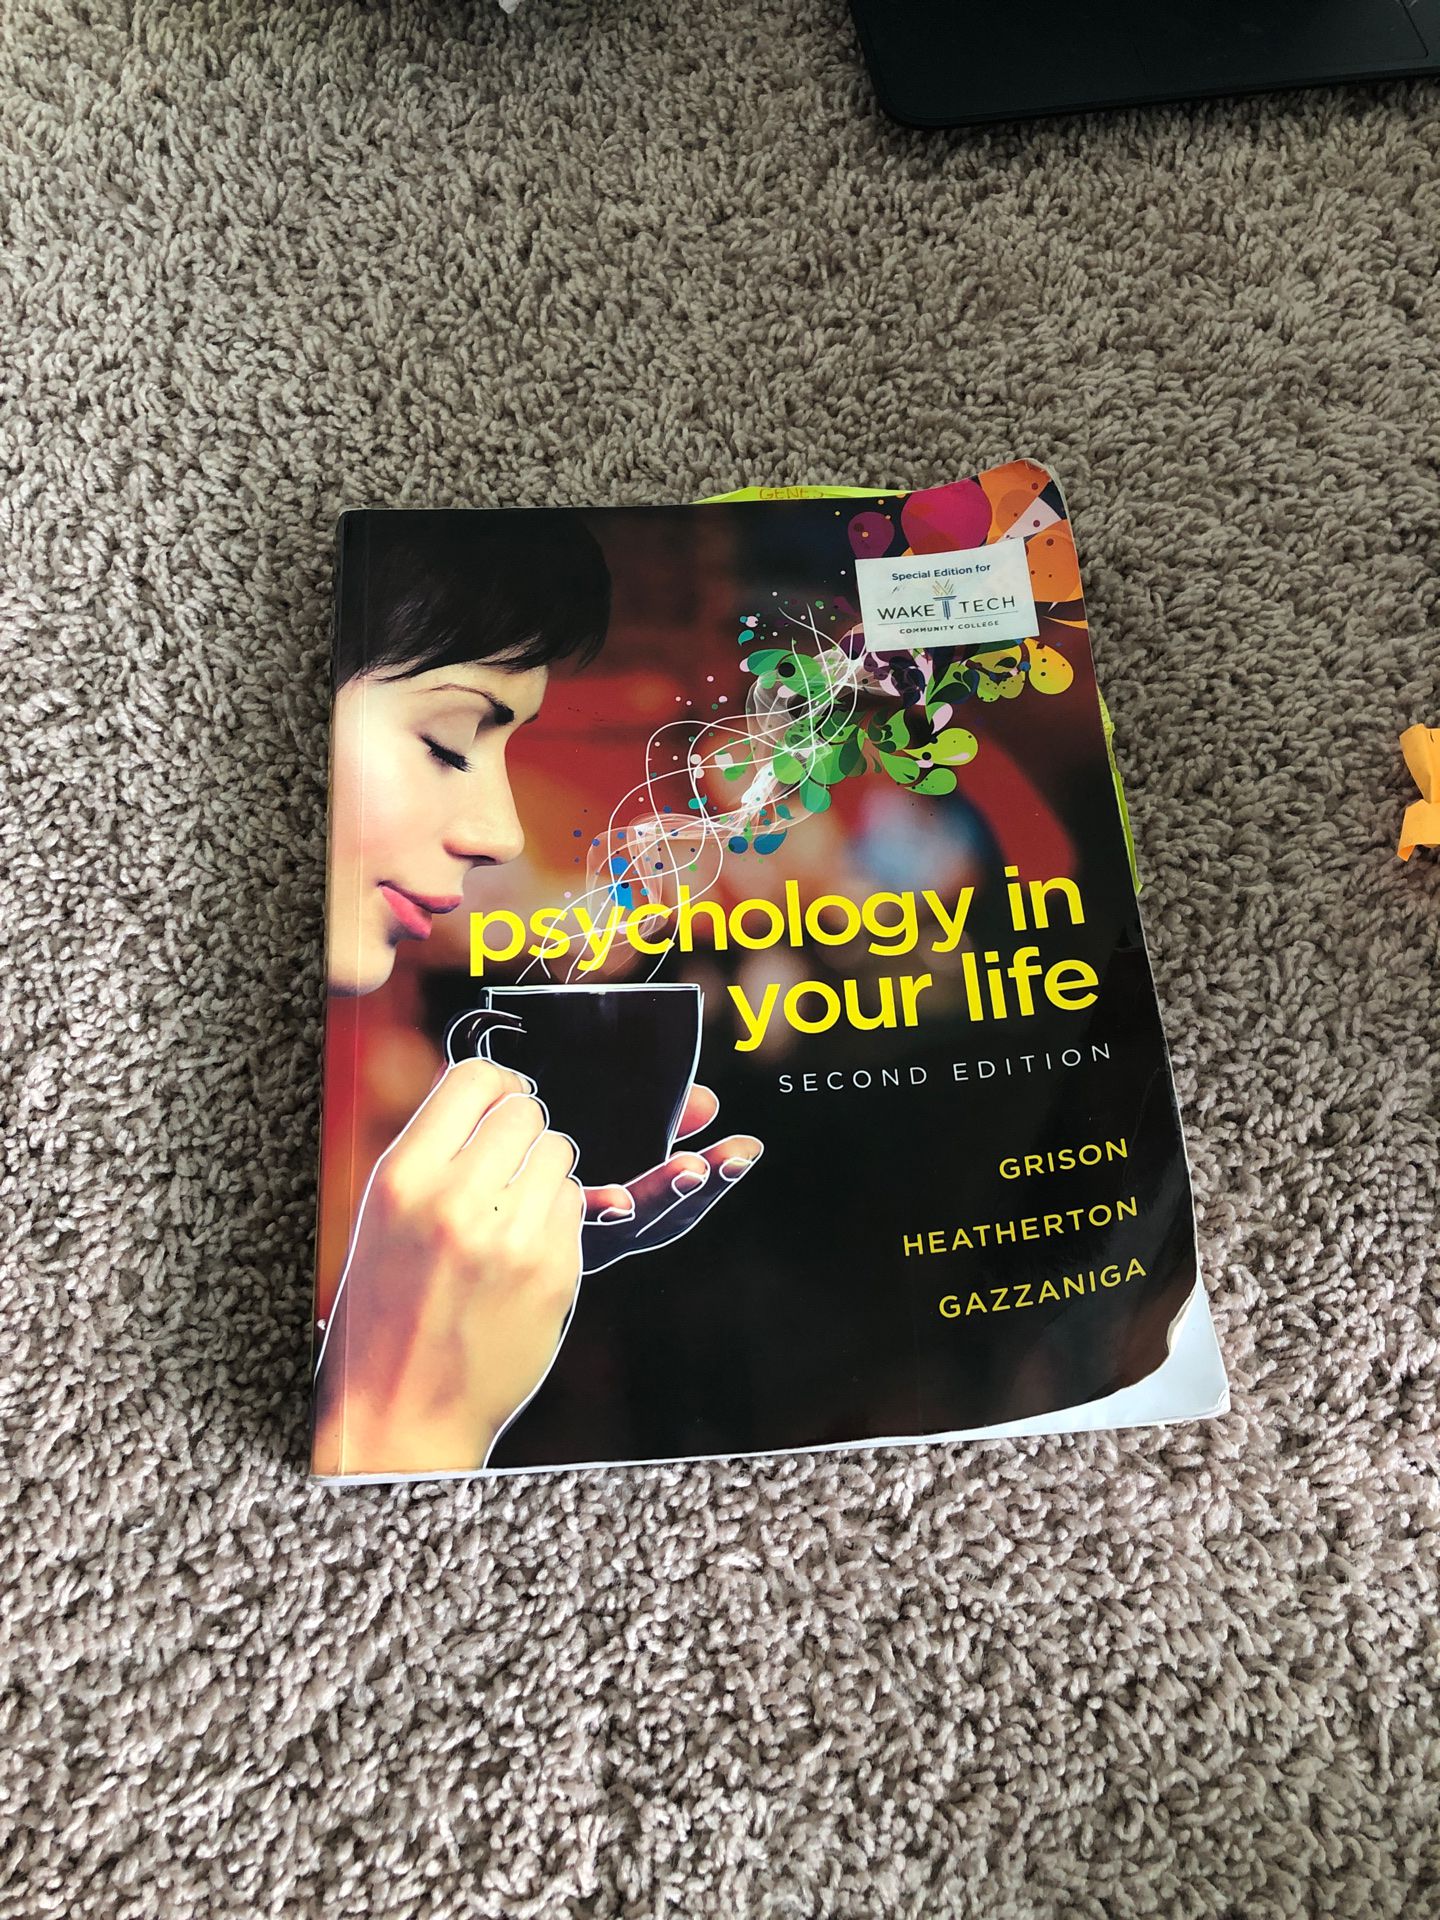 Psychology in your life 2nd Edition: Special Wake Tech edition